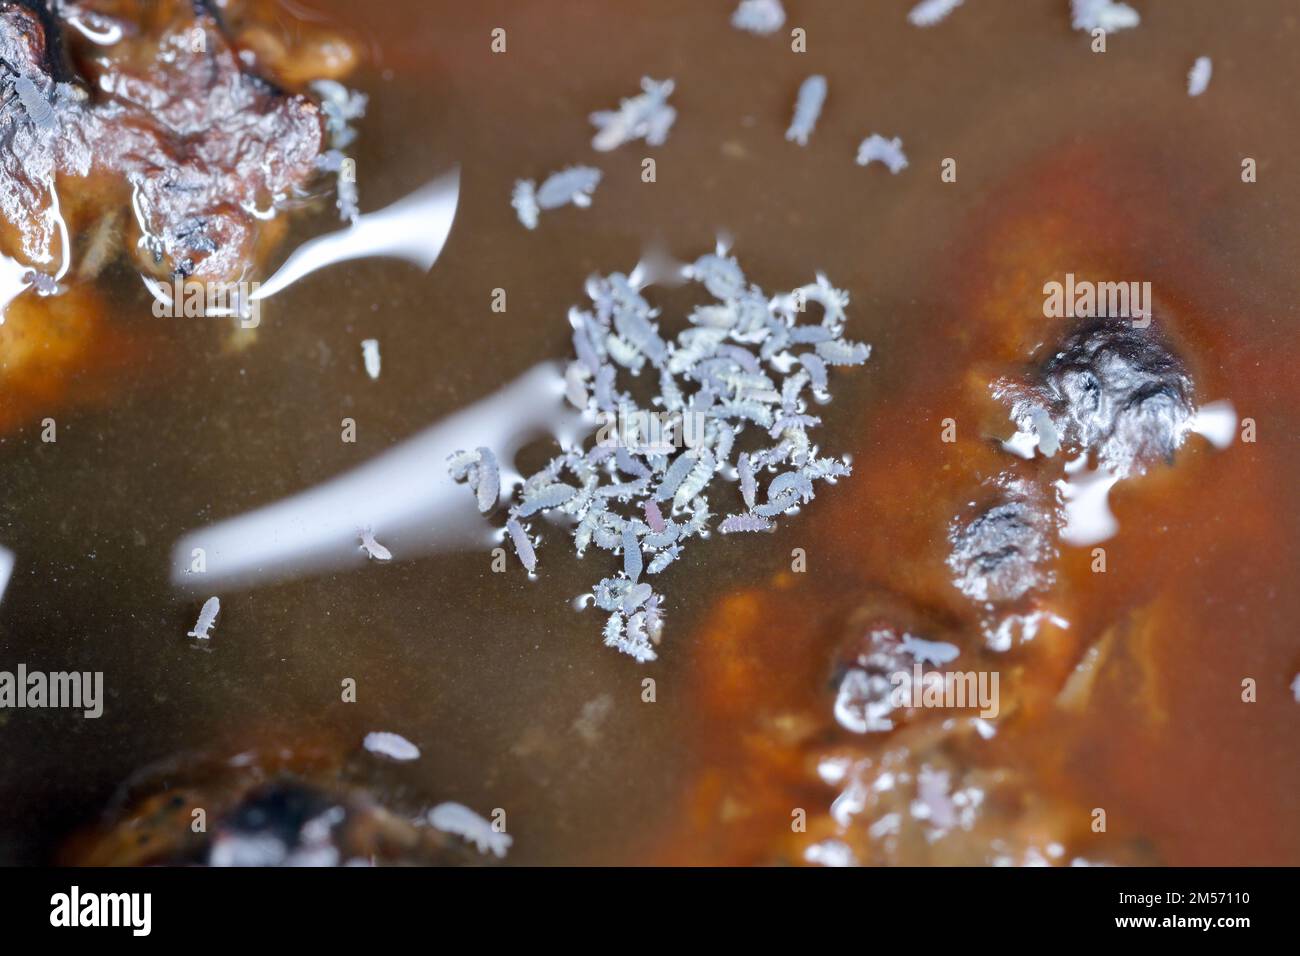 Group of Springtails, Order Collembola on the surface of dirty water. Stock Photo